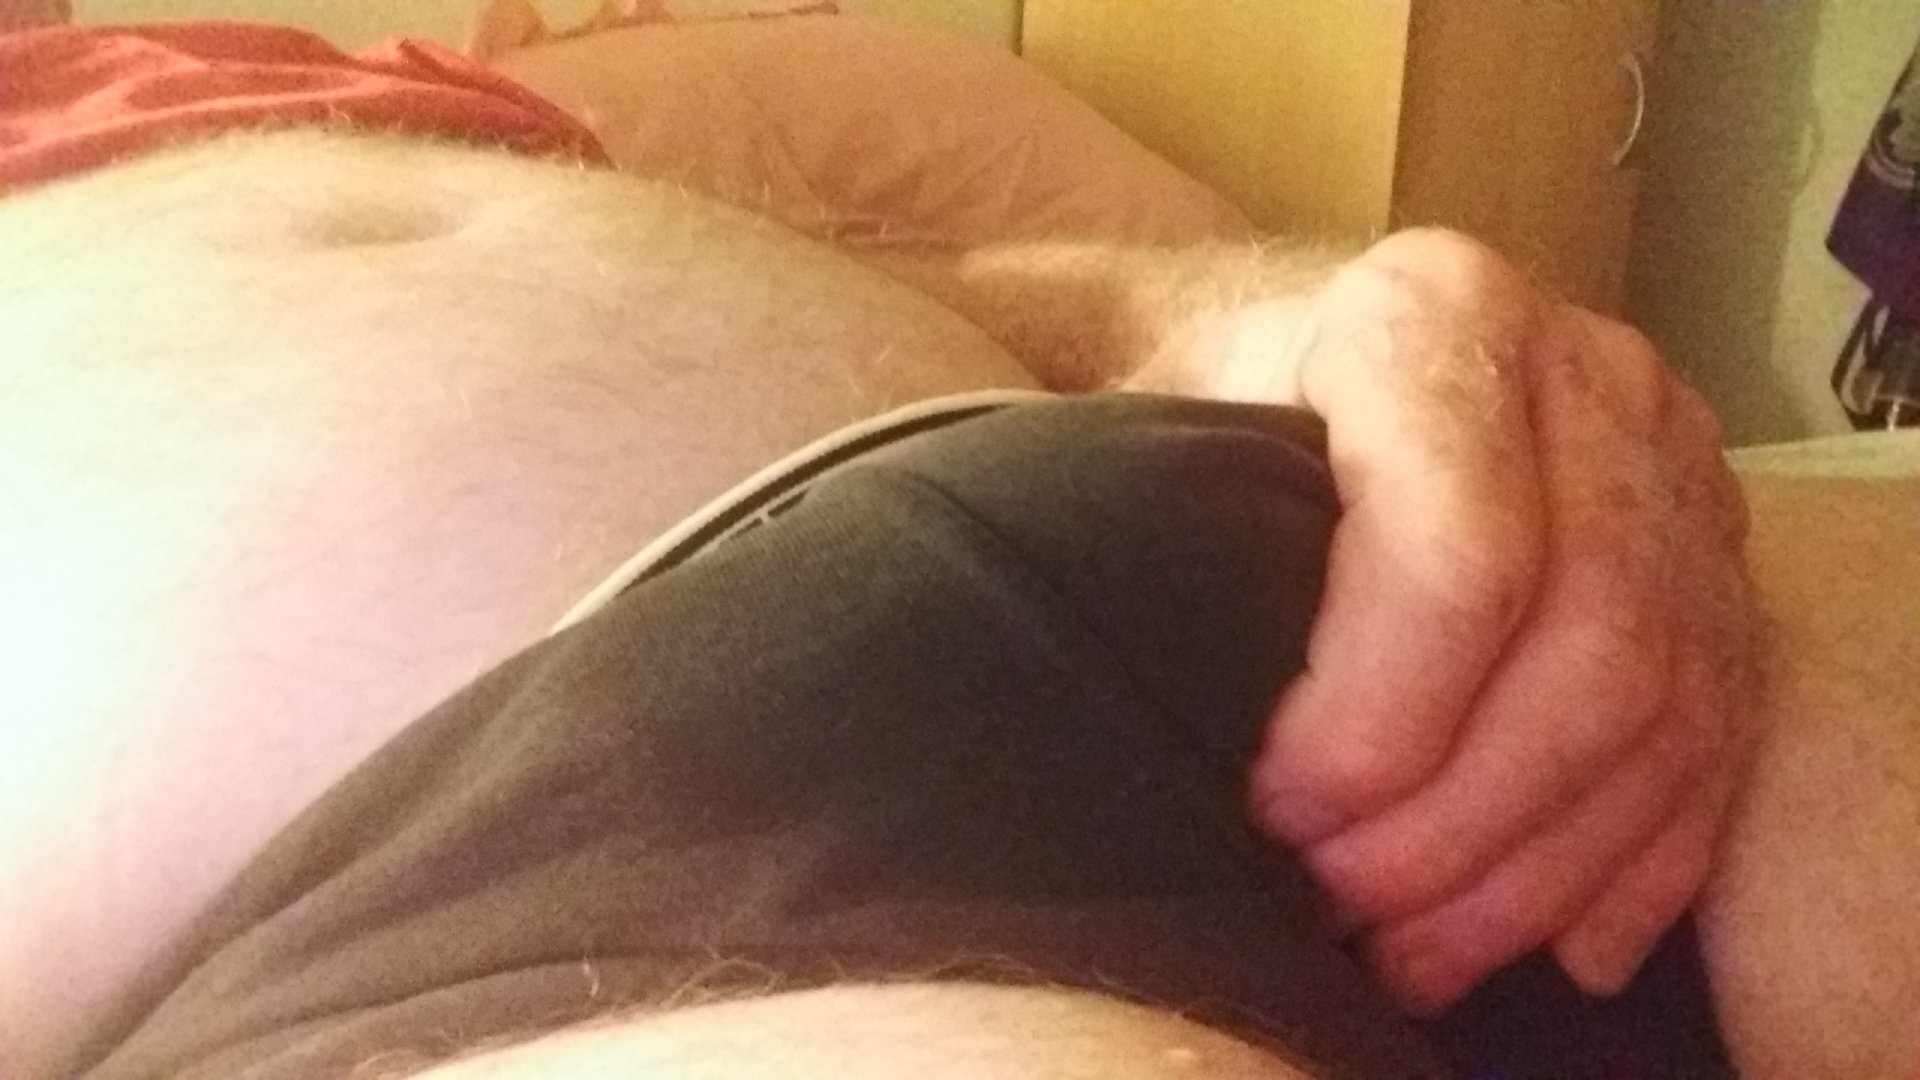 Deano81 from New South Wales,Australia